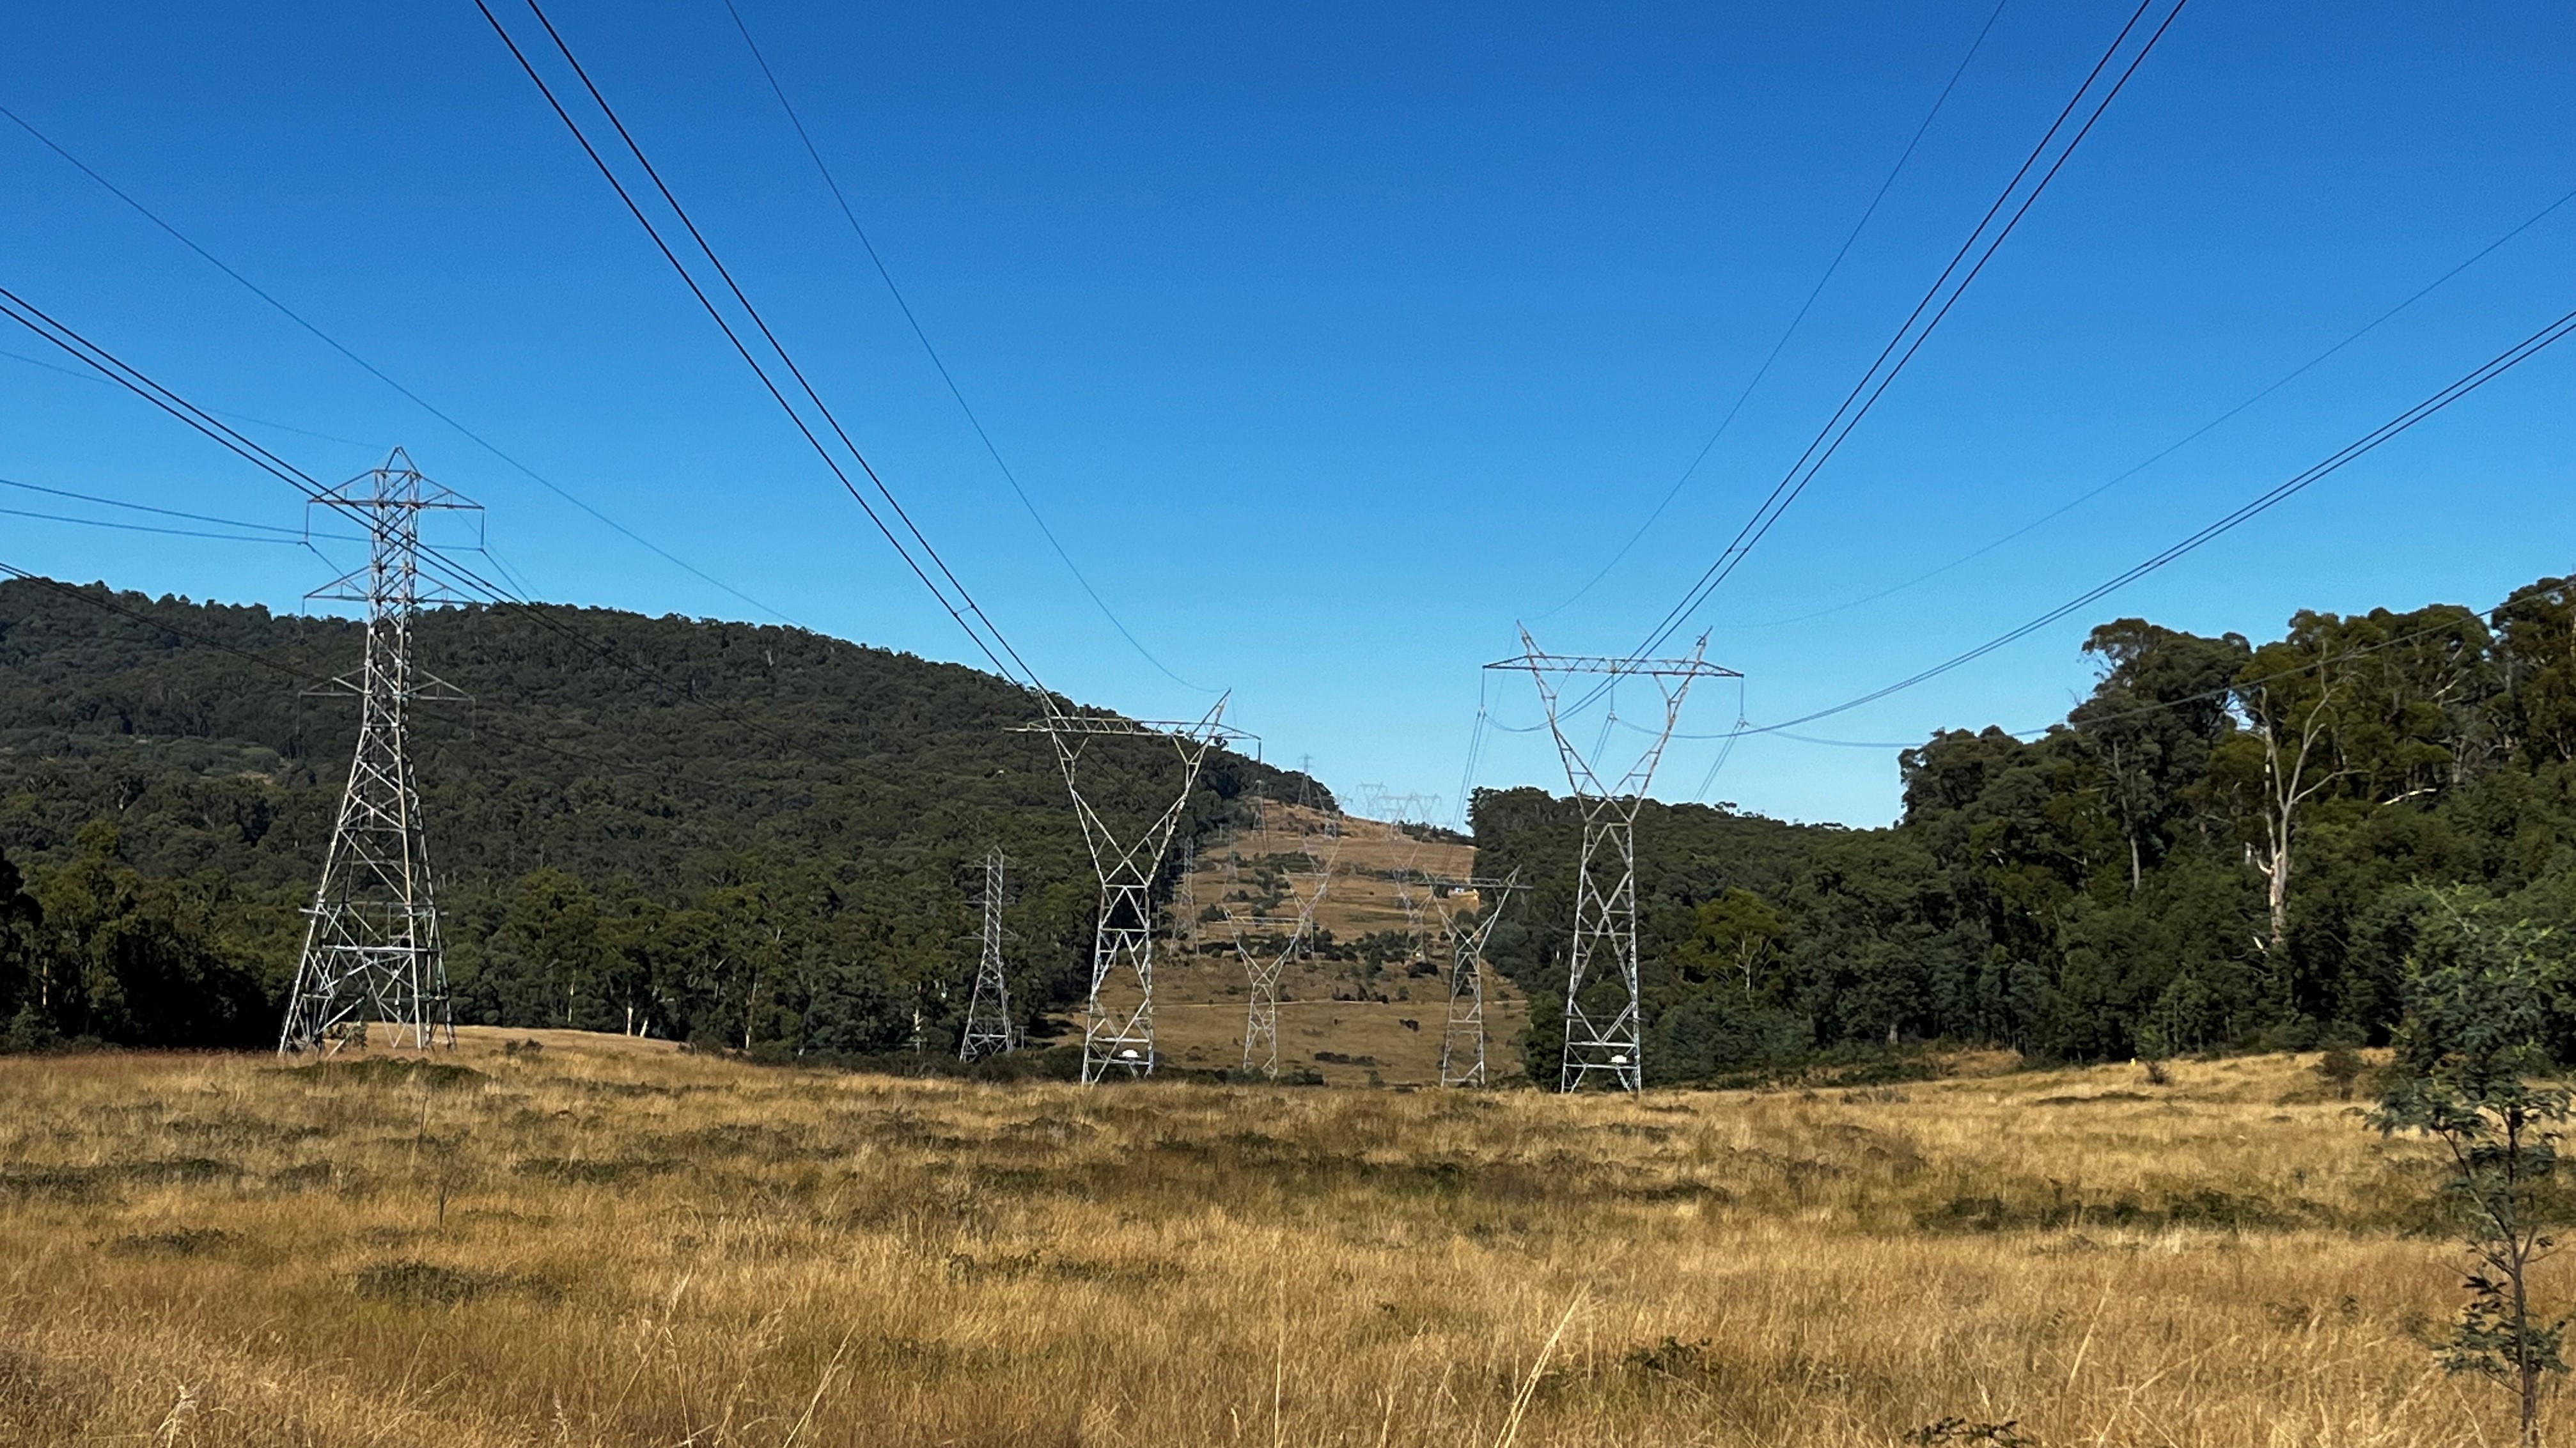 Transmission towers and powerlines in an easement